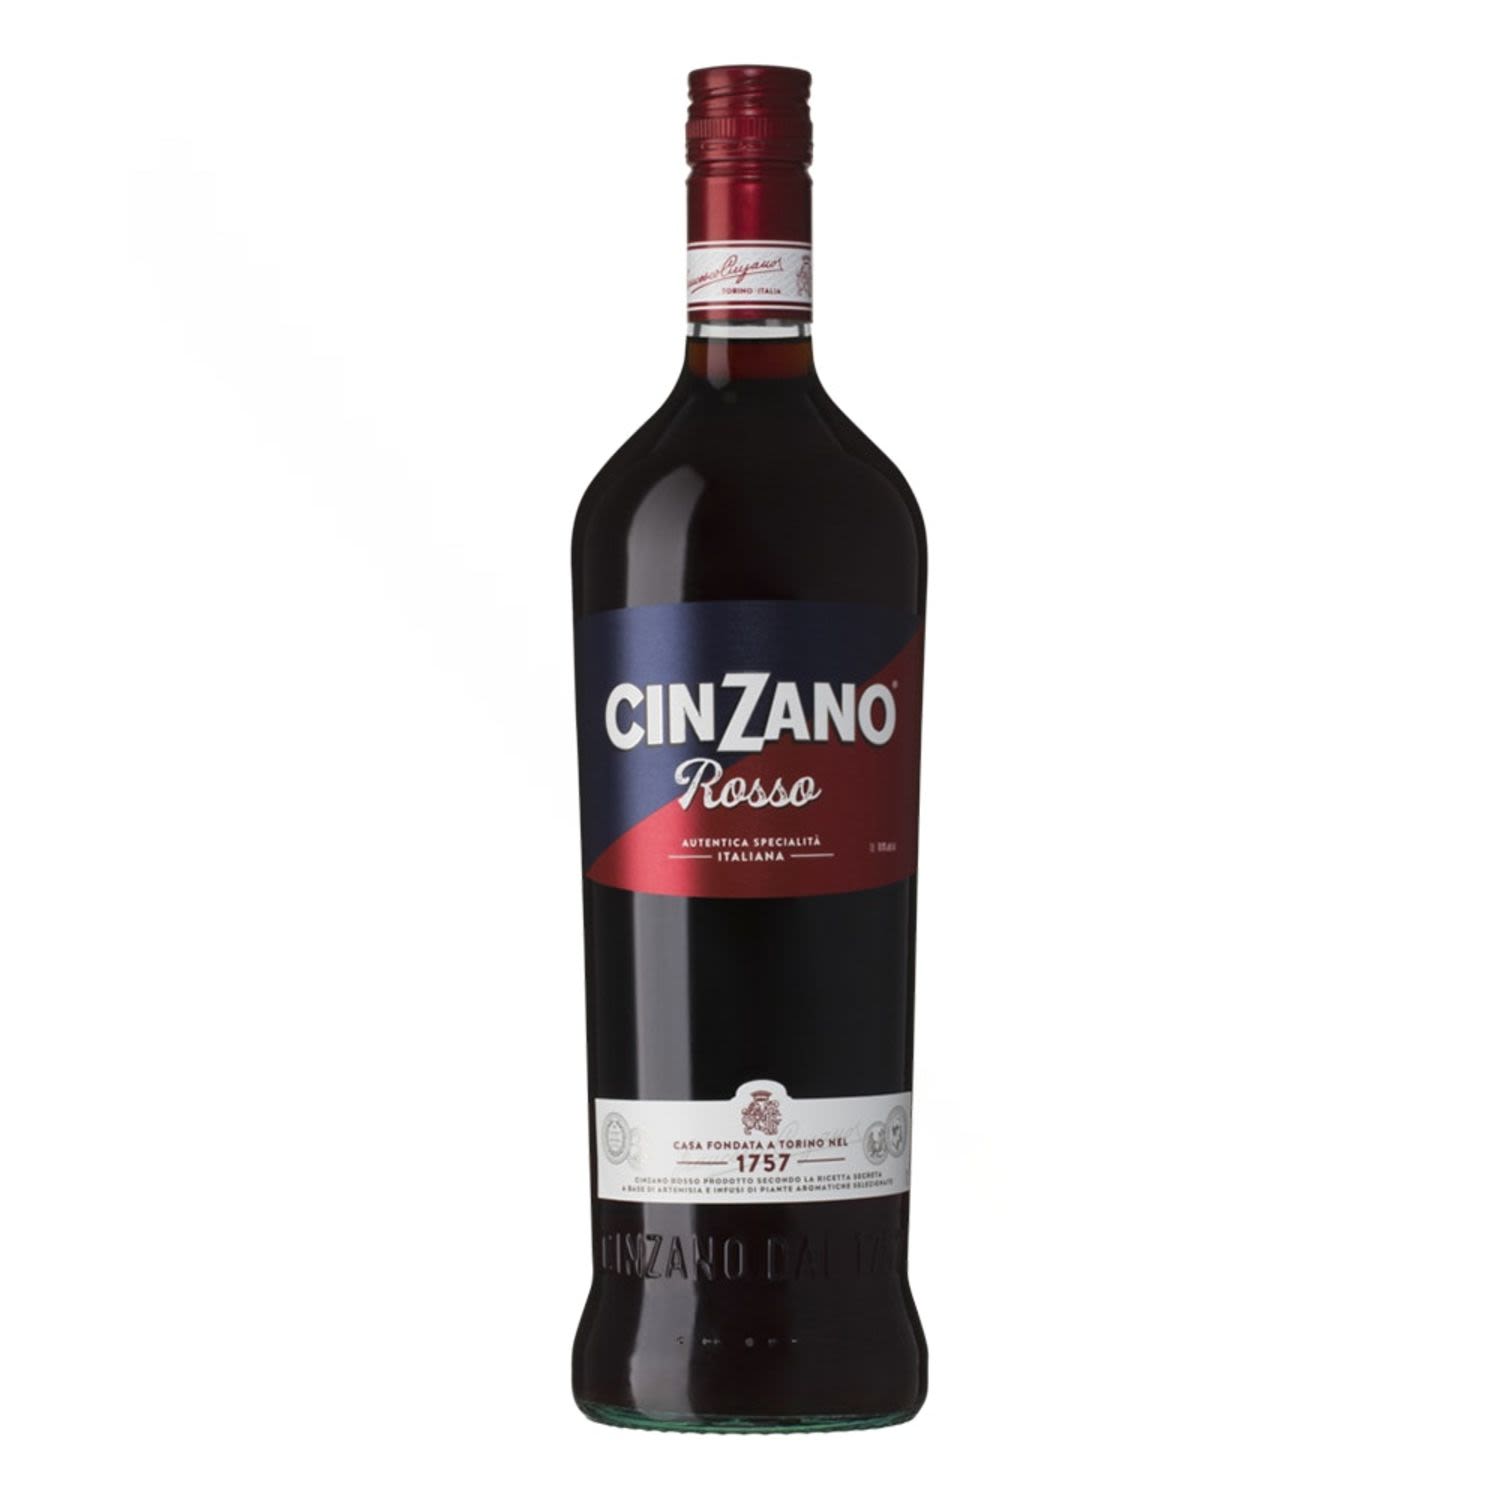 Created in Torino, Cinzano Rosso is the original of Cinzano’s vermouth portfolio. Its amber colour reflects the product’s rich infusion of herbs and spices, while representing its prestige and quality. It is the perfect ingredient for cocktails thanks to its delicate, yet persistent aftertaste and can be served neat or with a splash of soda.<br /> <br />Alcohol Volume: 14.40%<br /><br />Pack Format: Bottle<br /><br />Standard Drinks: 11.4</br /><br />Pack Type: Bottle<br /><br />Country of Origin: Italy<br /><br />Region: Piedmont<br /><br />Vintage: Non Vintage<br />